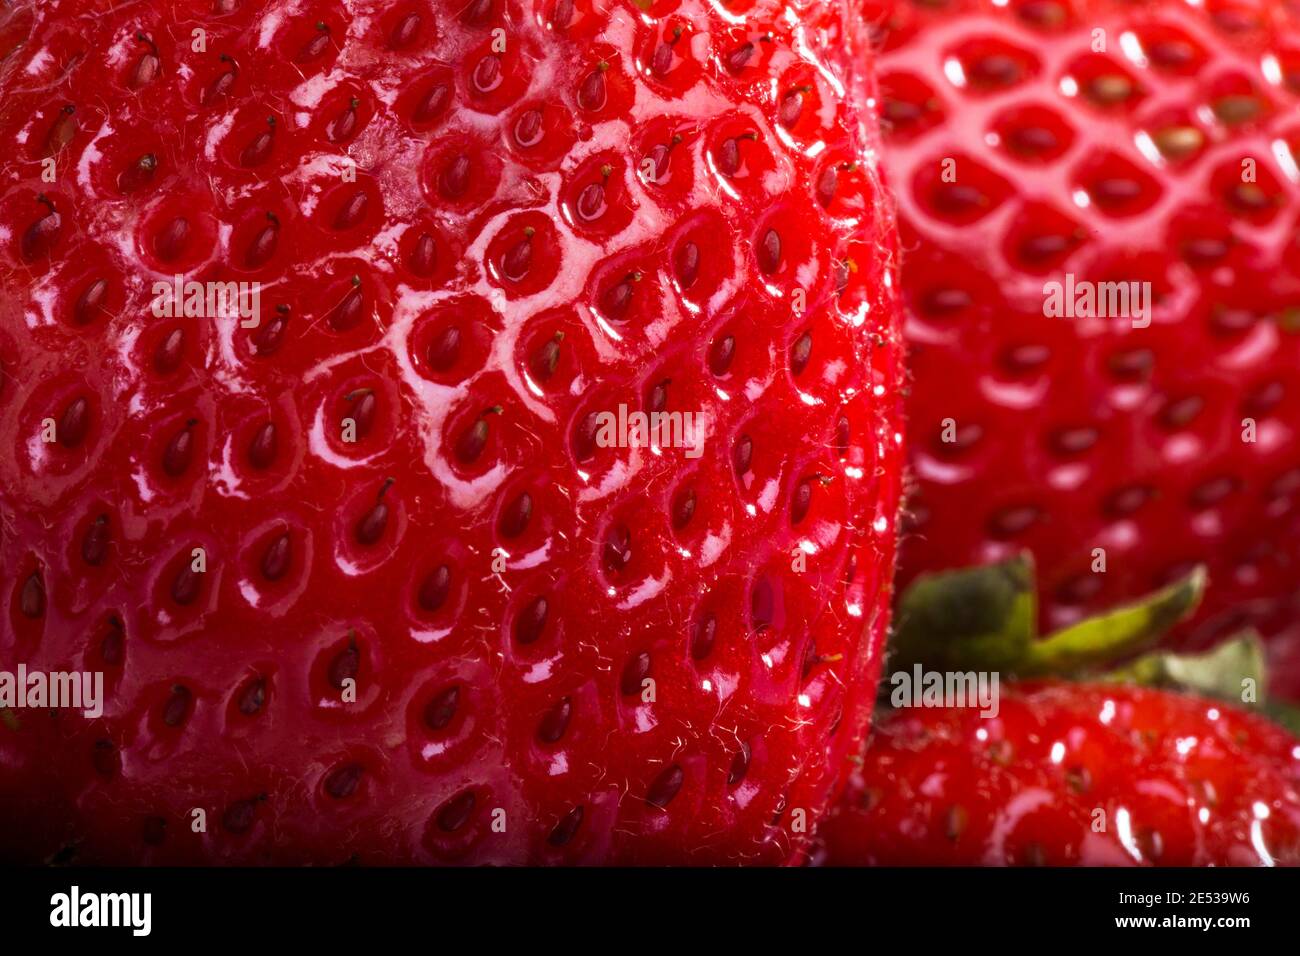 Red strawberry natural background for design purpose. Stock Photo